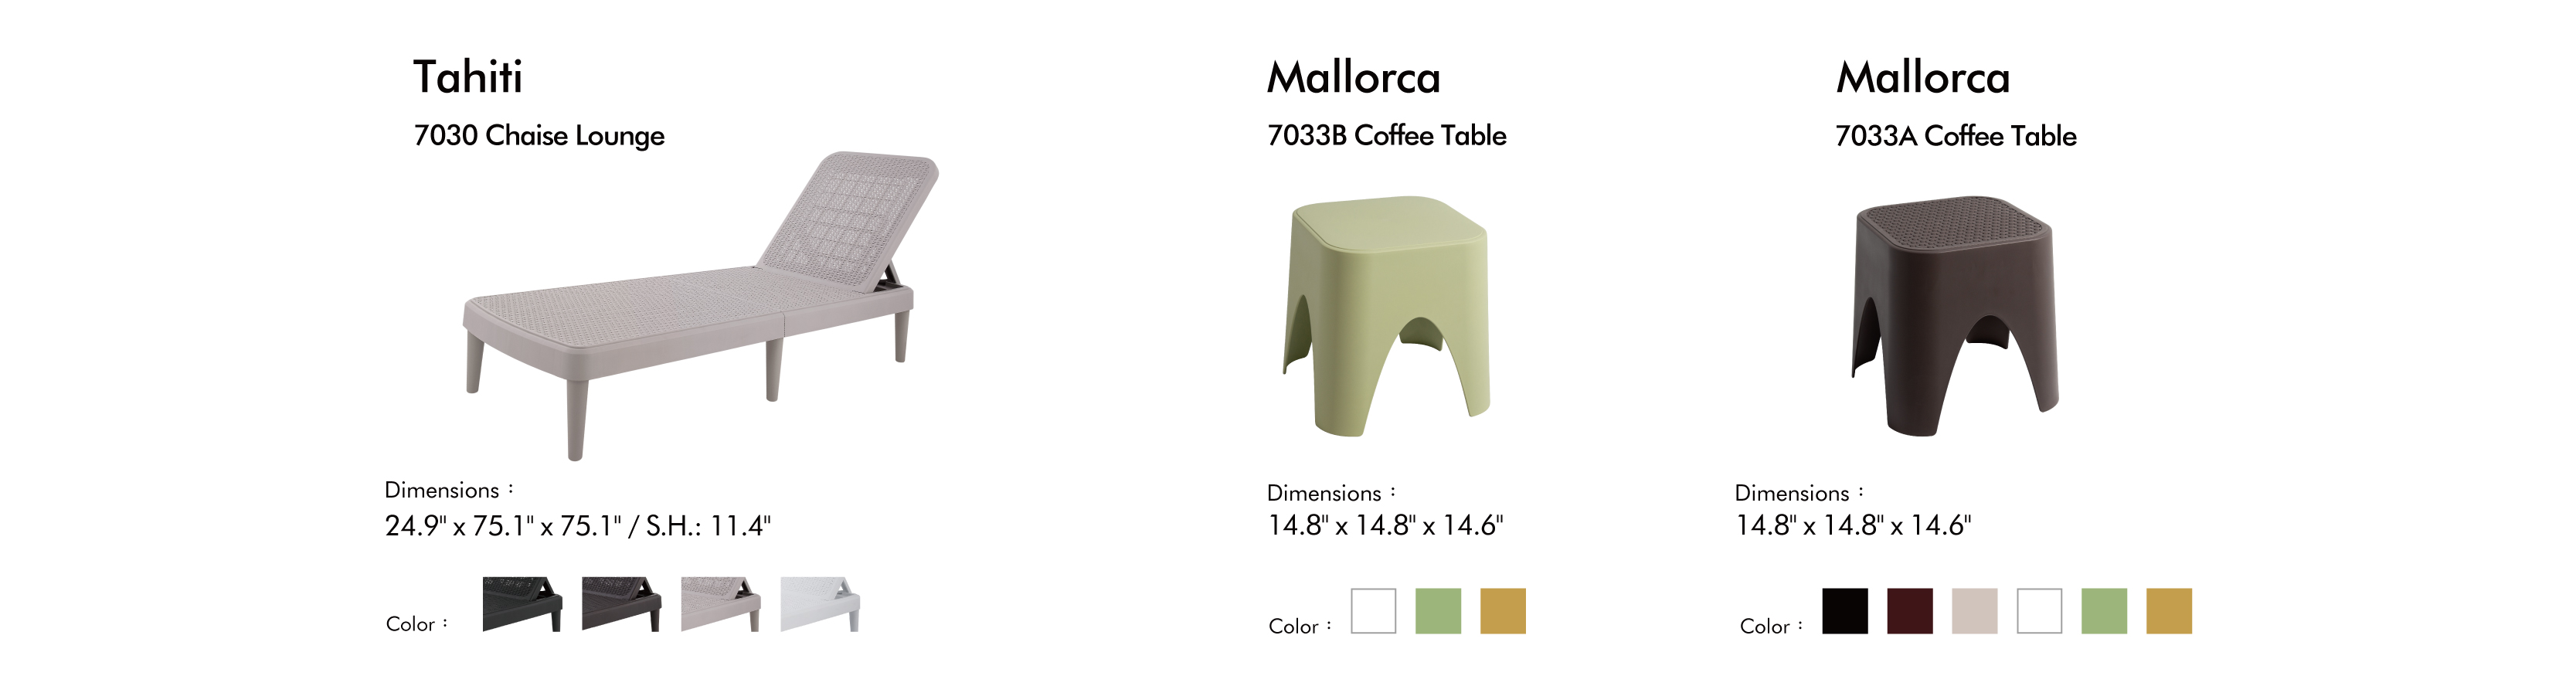 Sizes and colors of Tahiti Chaise Lounge and Mallorca Coffee Tables